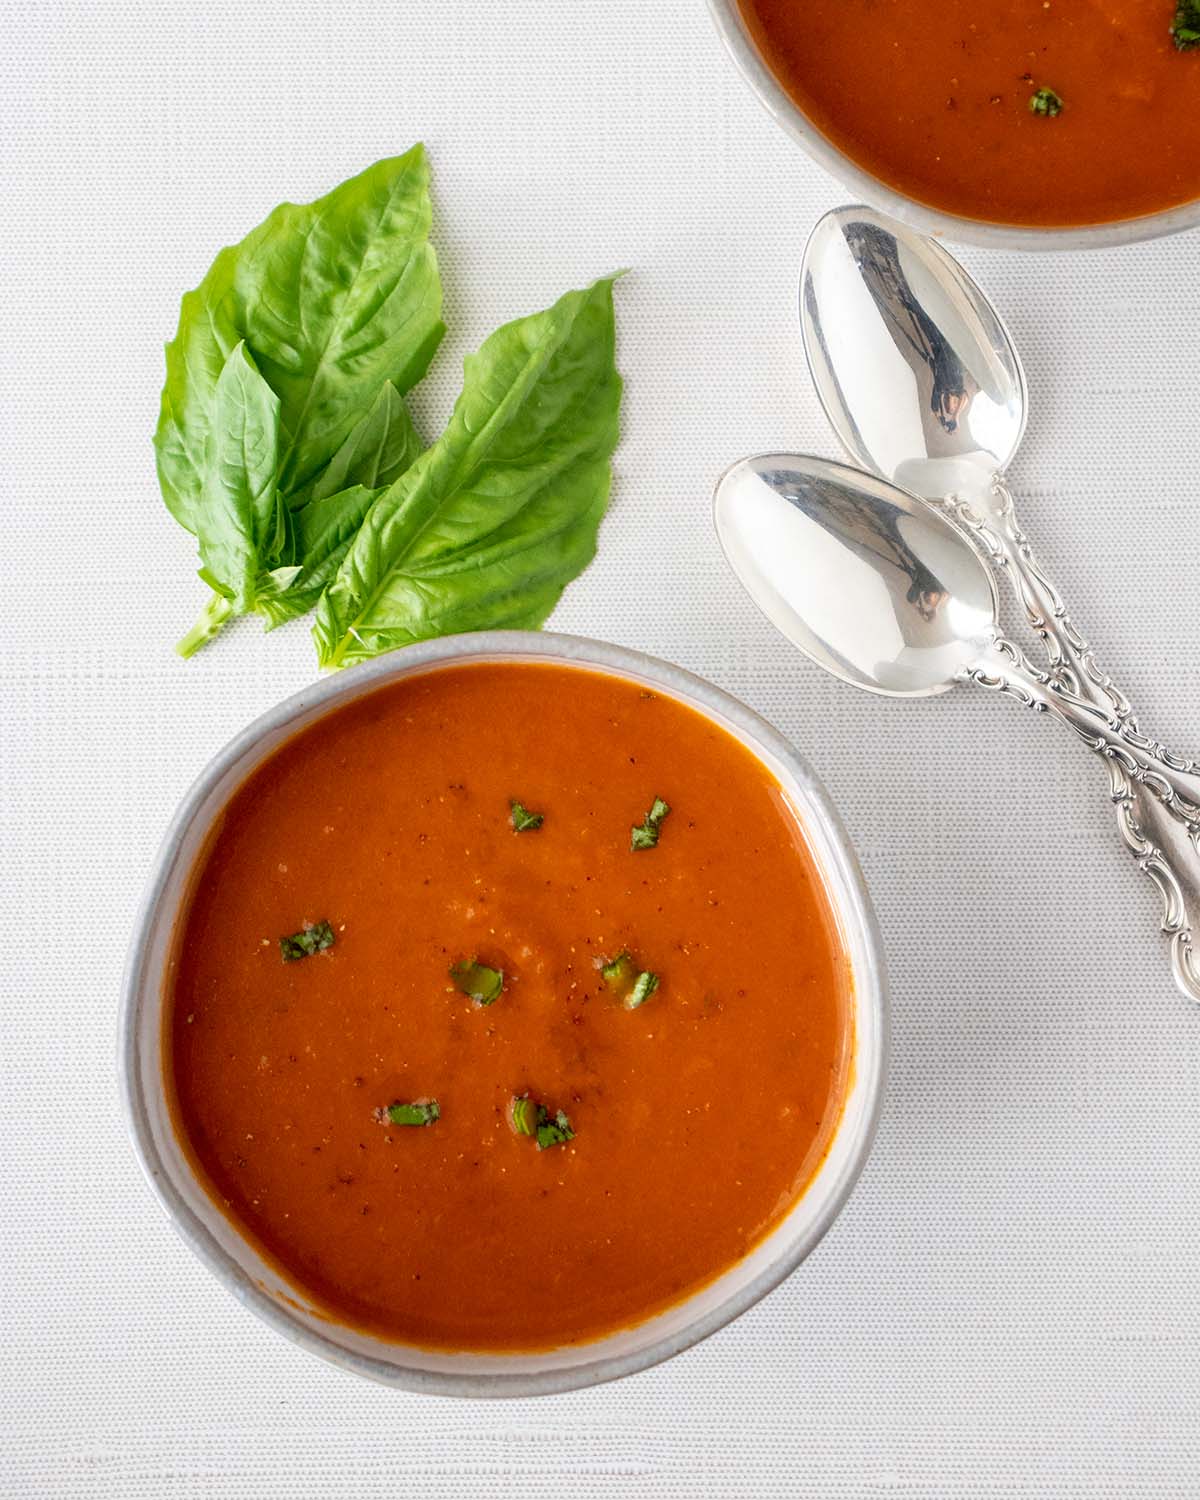 Vegan tomato soup in a grey bowl topped with fresh basil and cracked black pepper. Fresh basil leaves and two silver spoons beside the bowl.